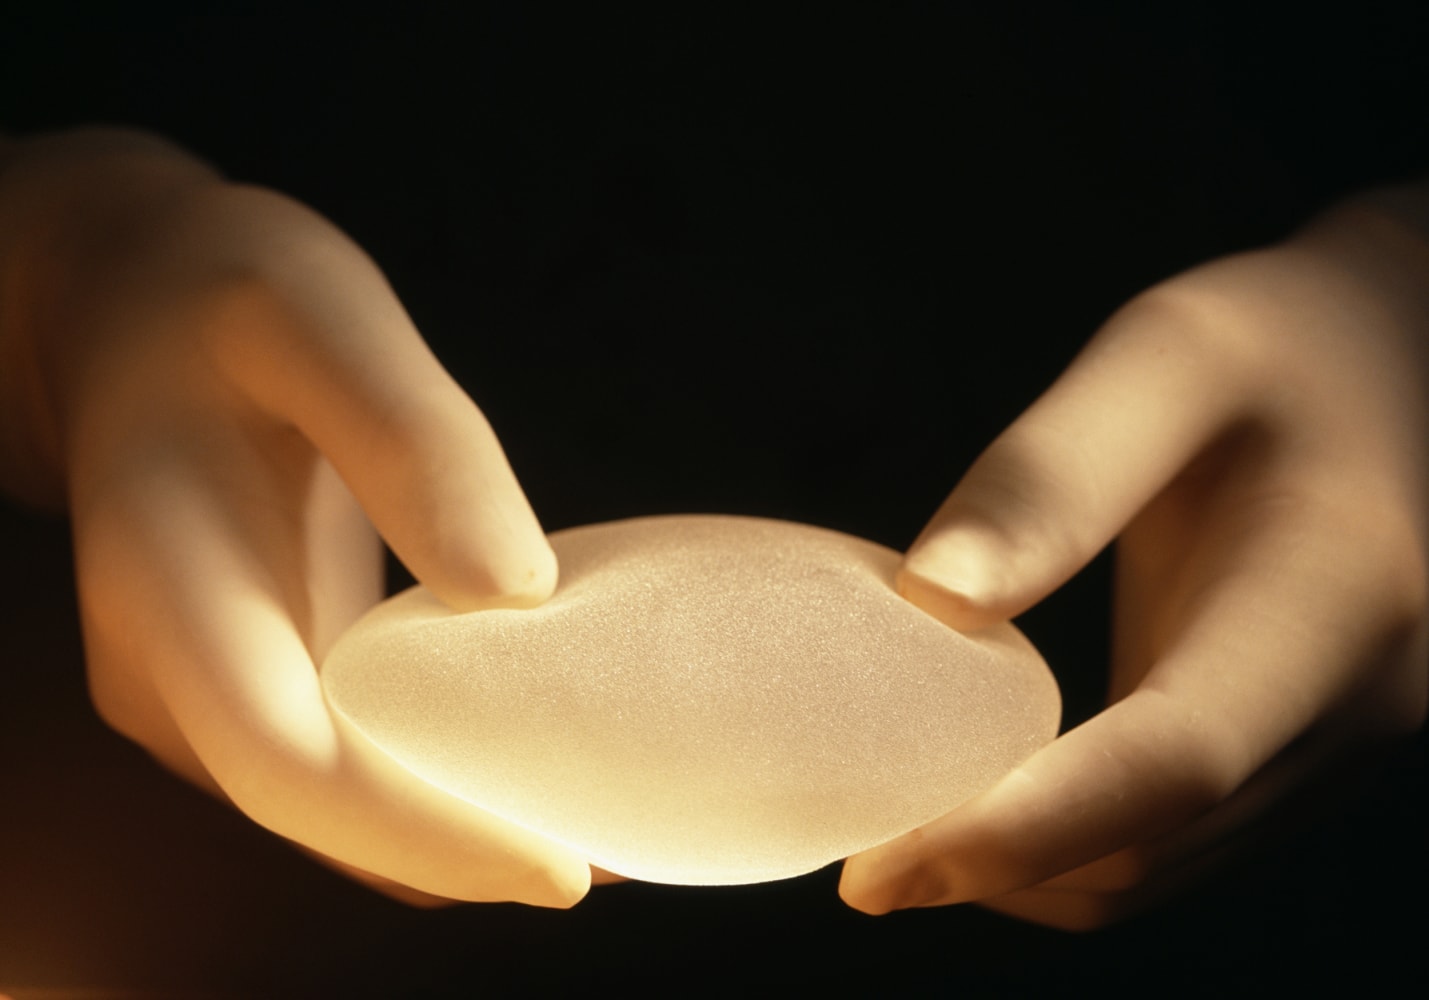 Breast Implants Can Cause Rare Form of Cancer, FDA Says